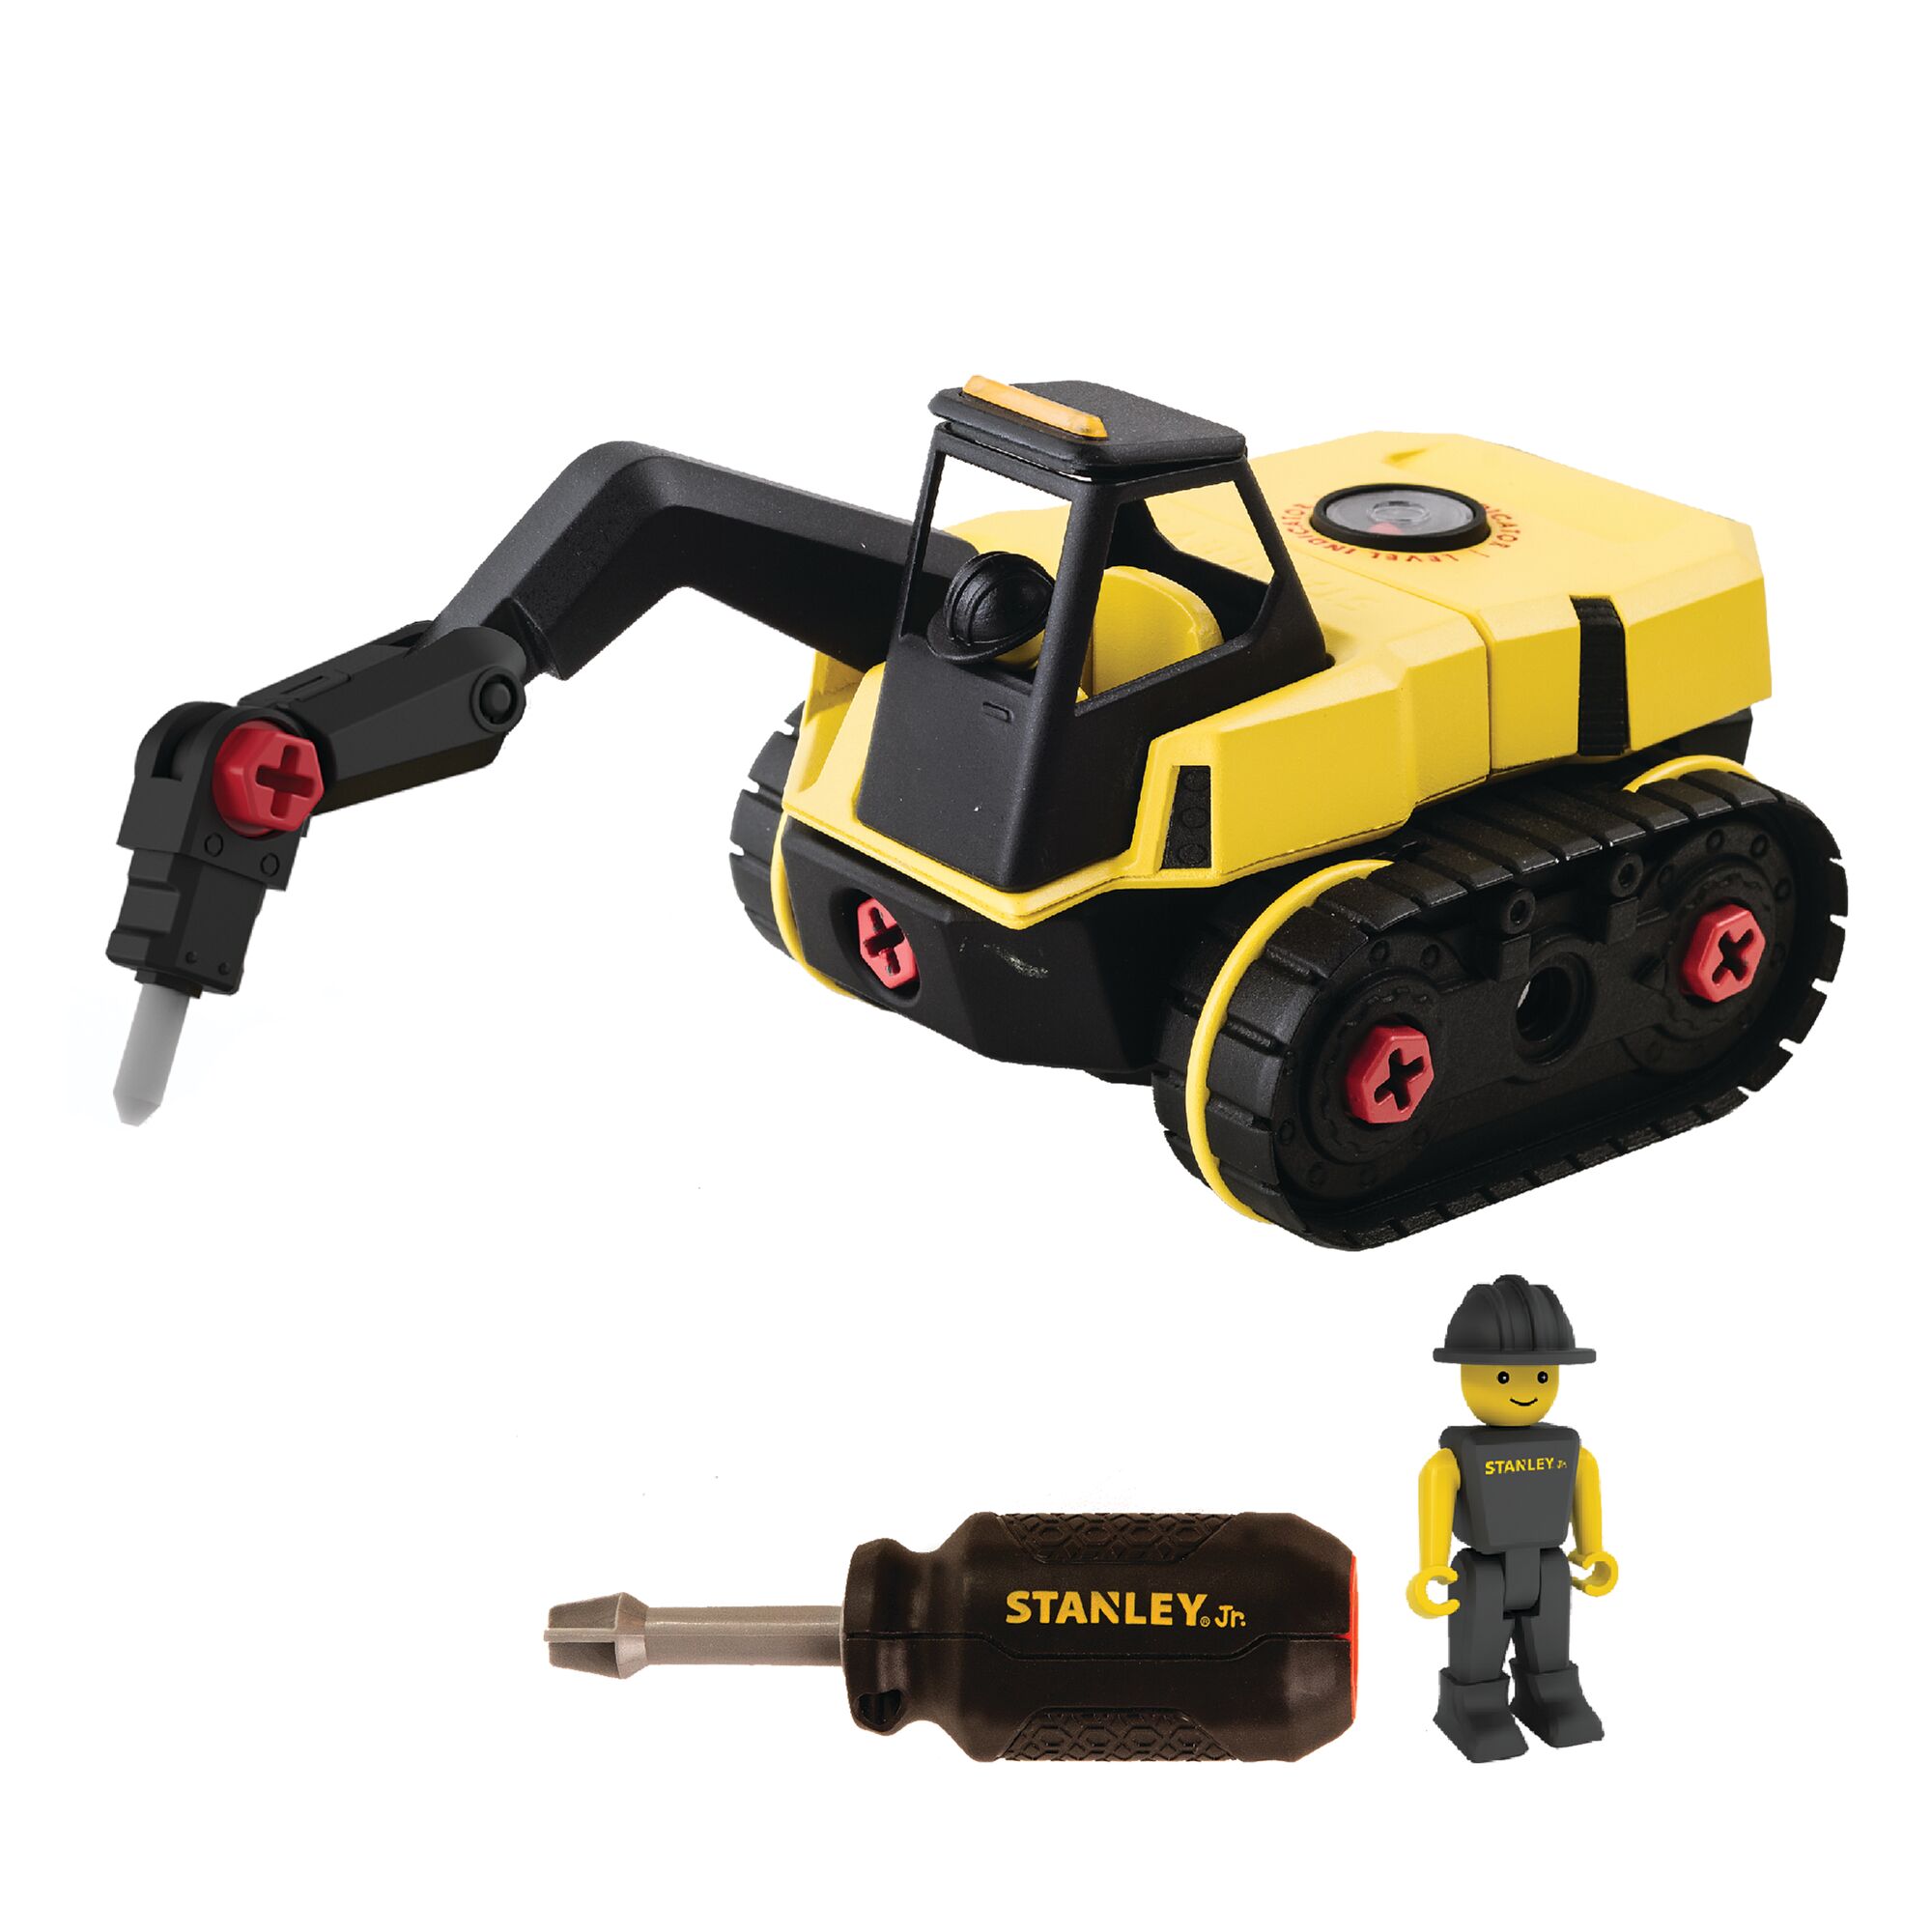 Toys | STANLEY® Tools